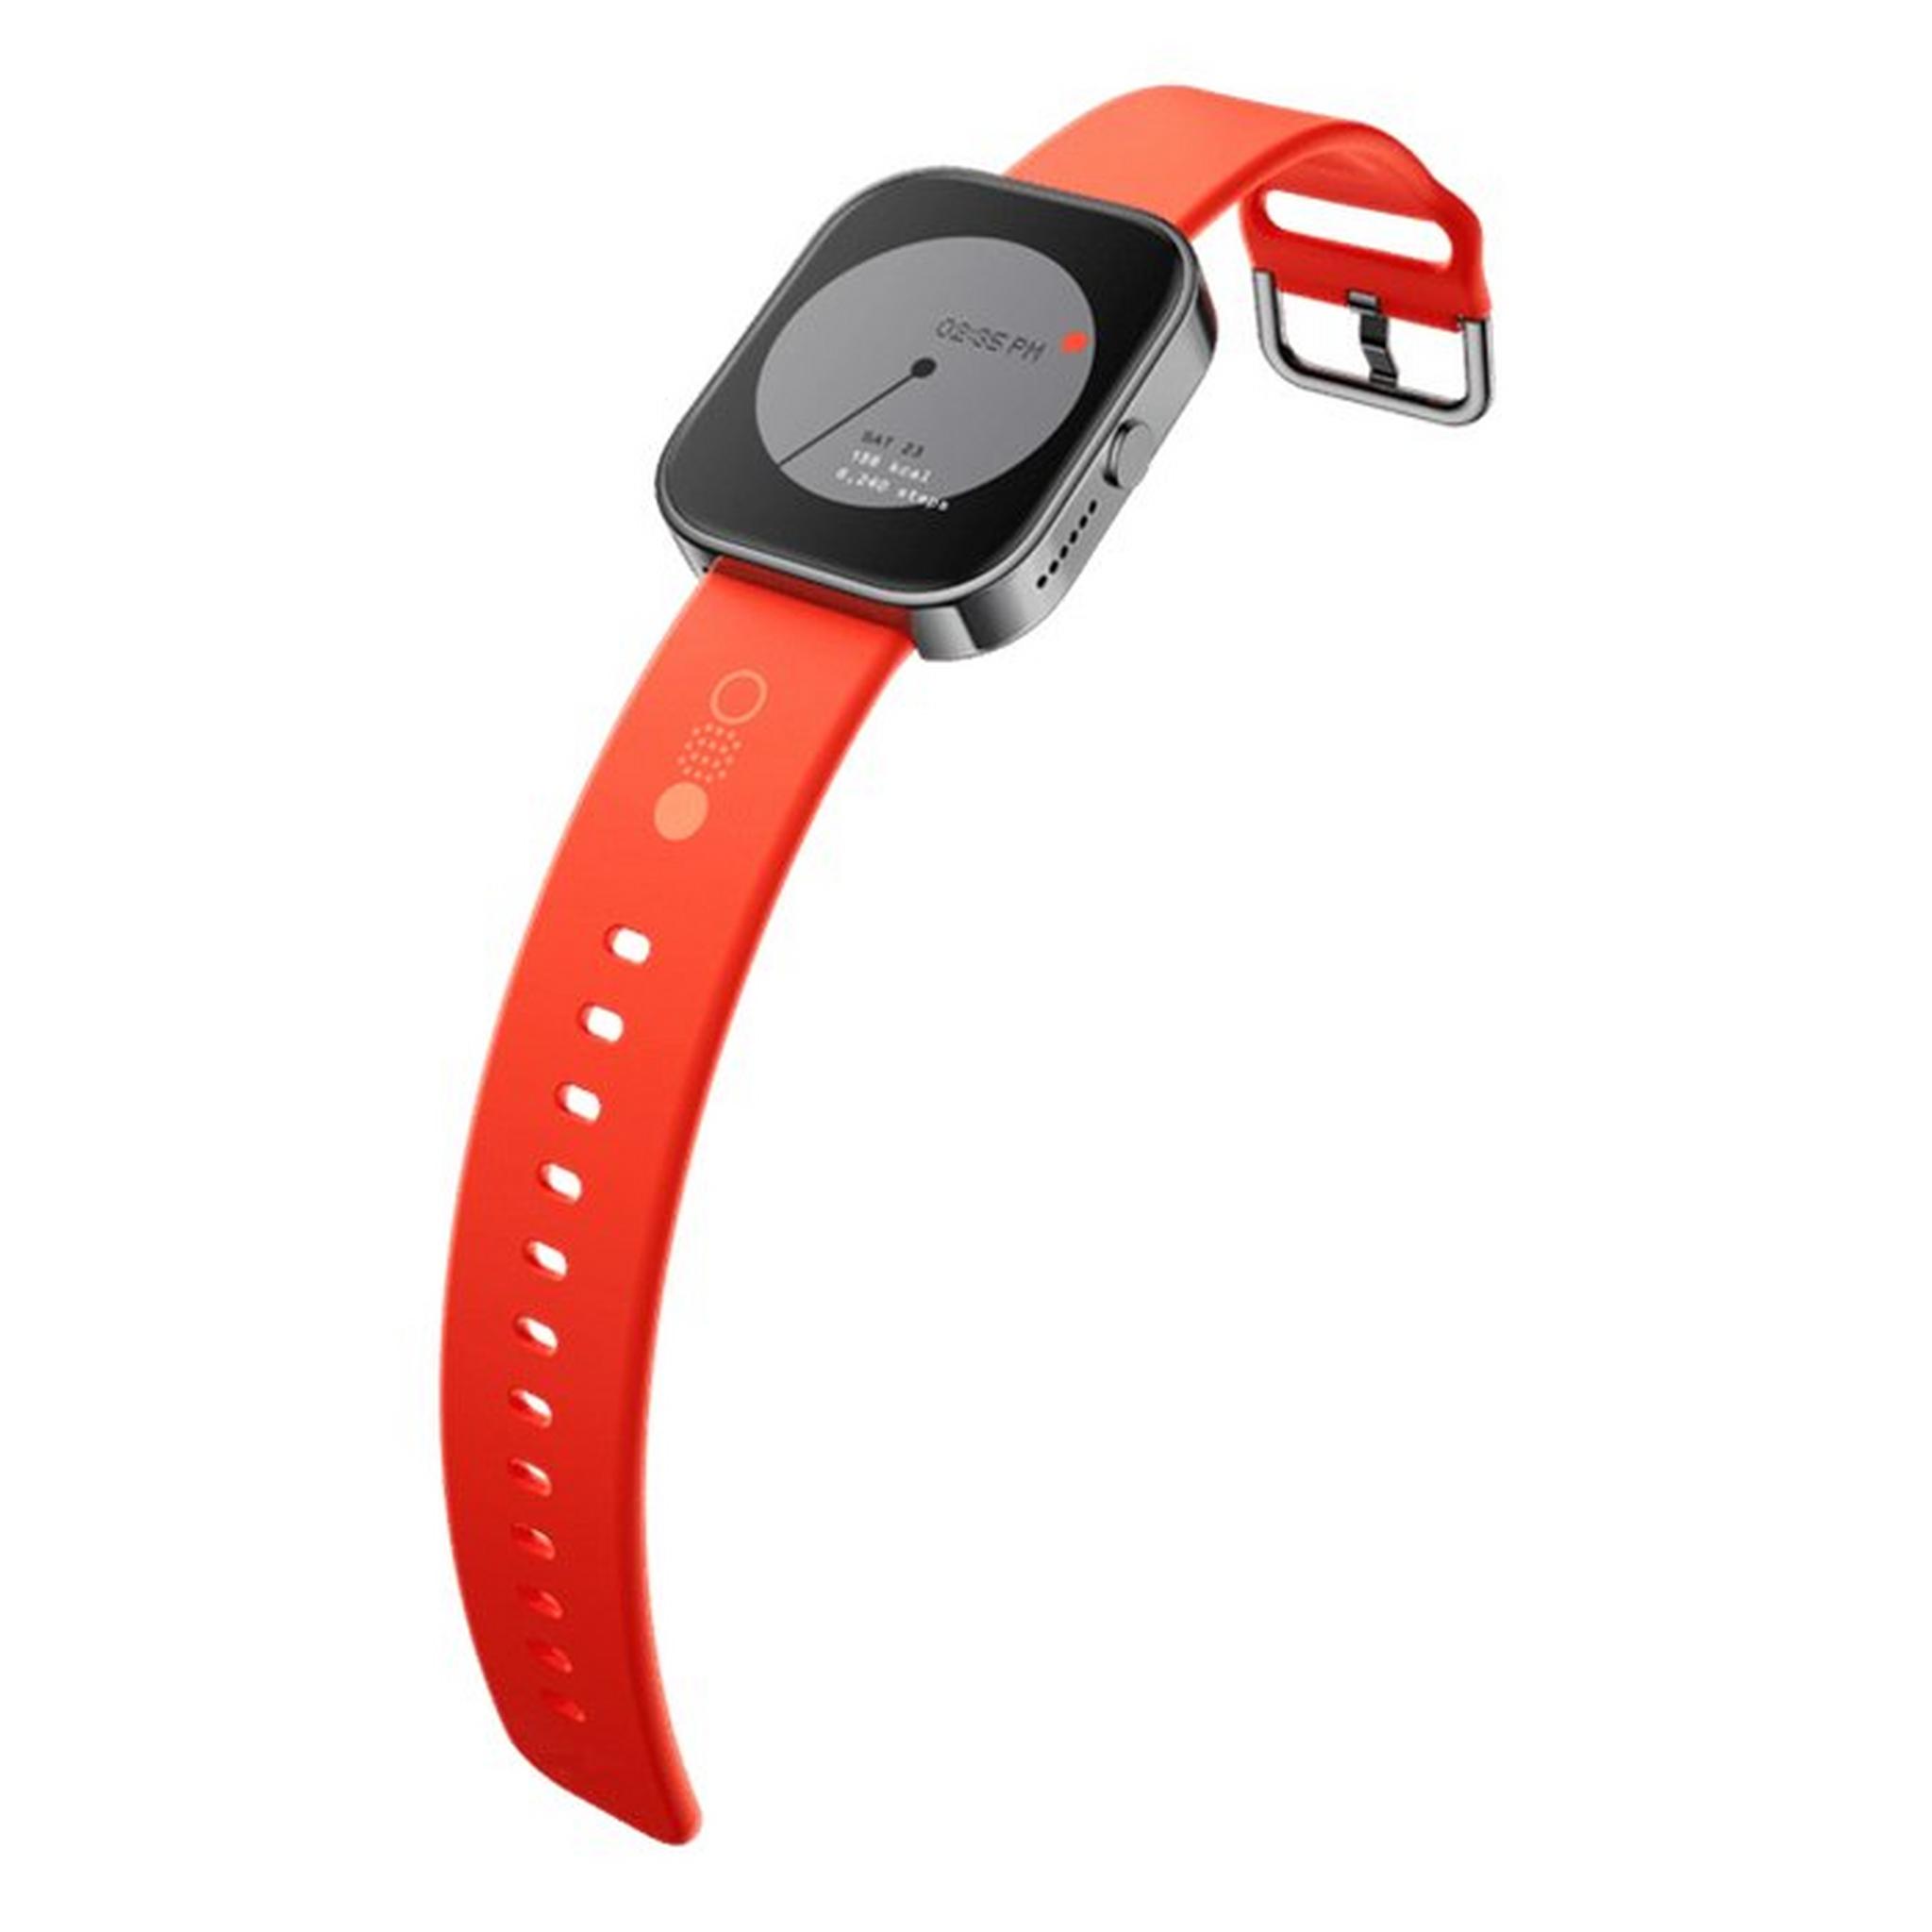 Nothing CMF Watch Pro Smartwatch, 1.96-inch, Silicon Strap, A10700006 - Orange